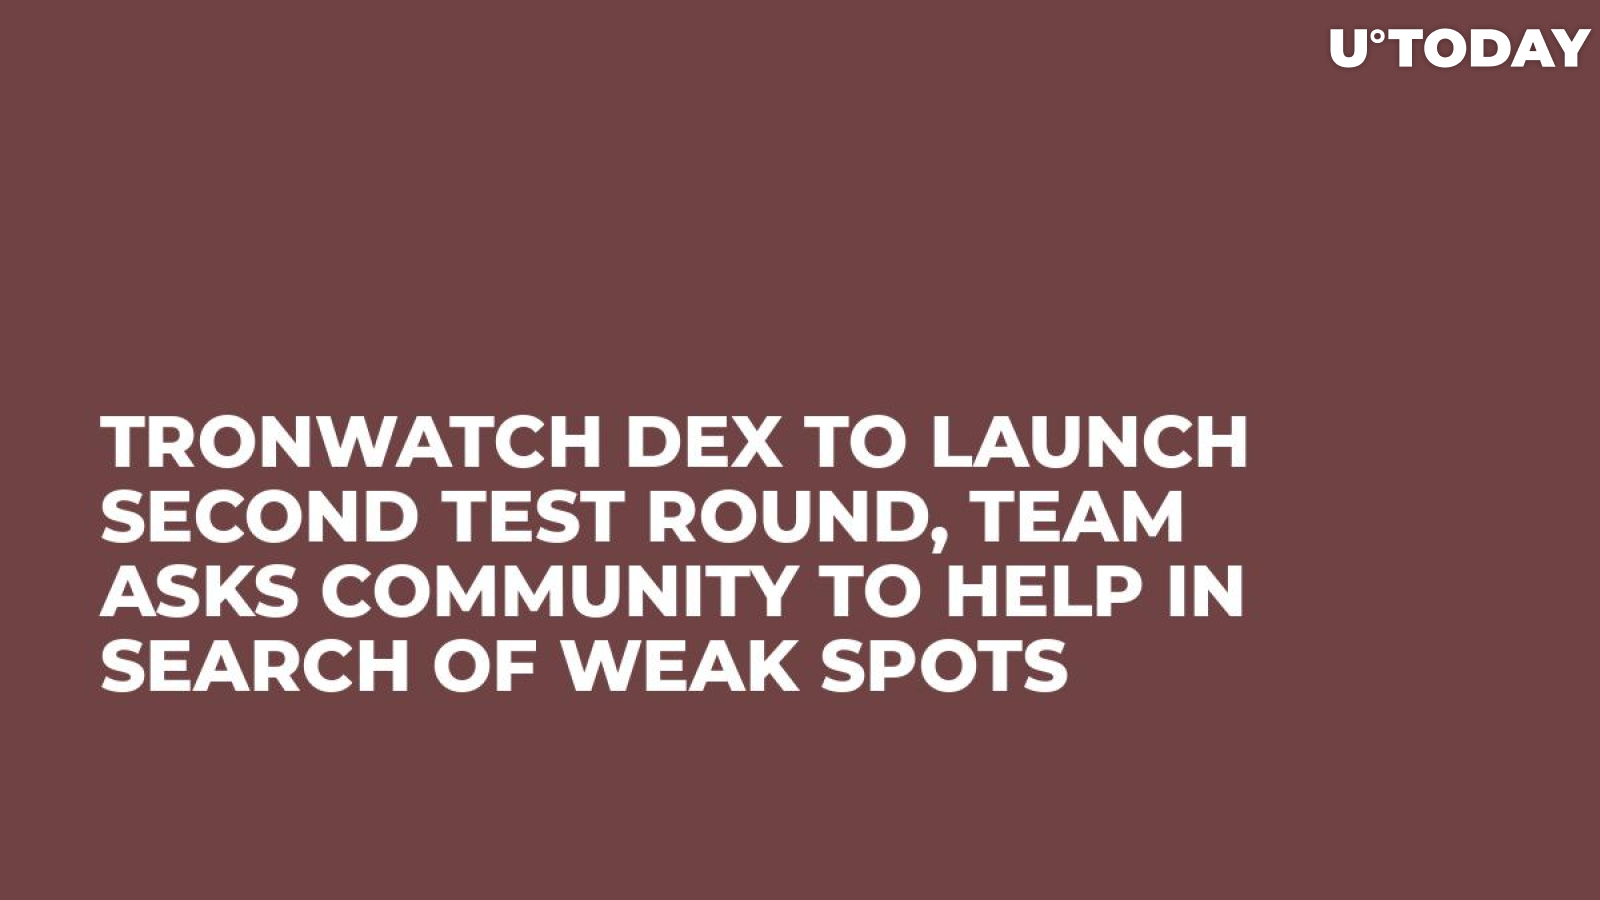 TronWatch DEX to Launch Second Test Round, Team Asks Community to Help in Search of Weak Spots